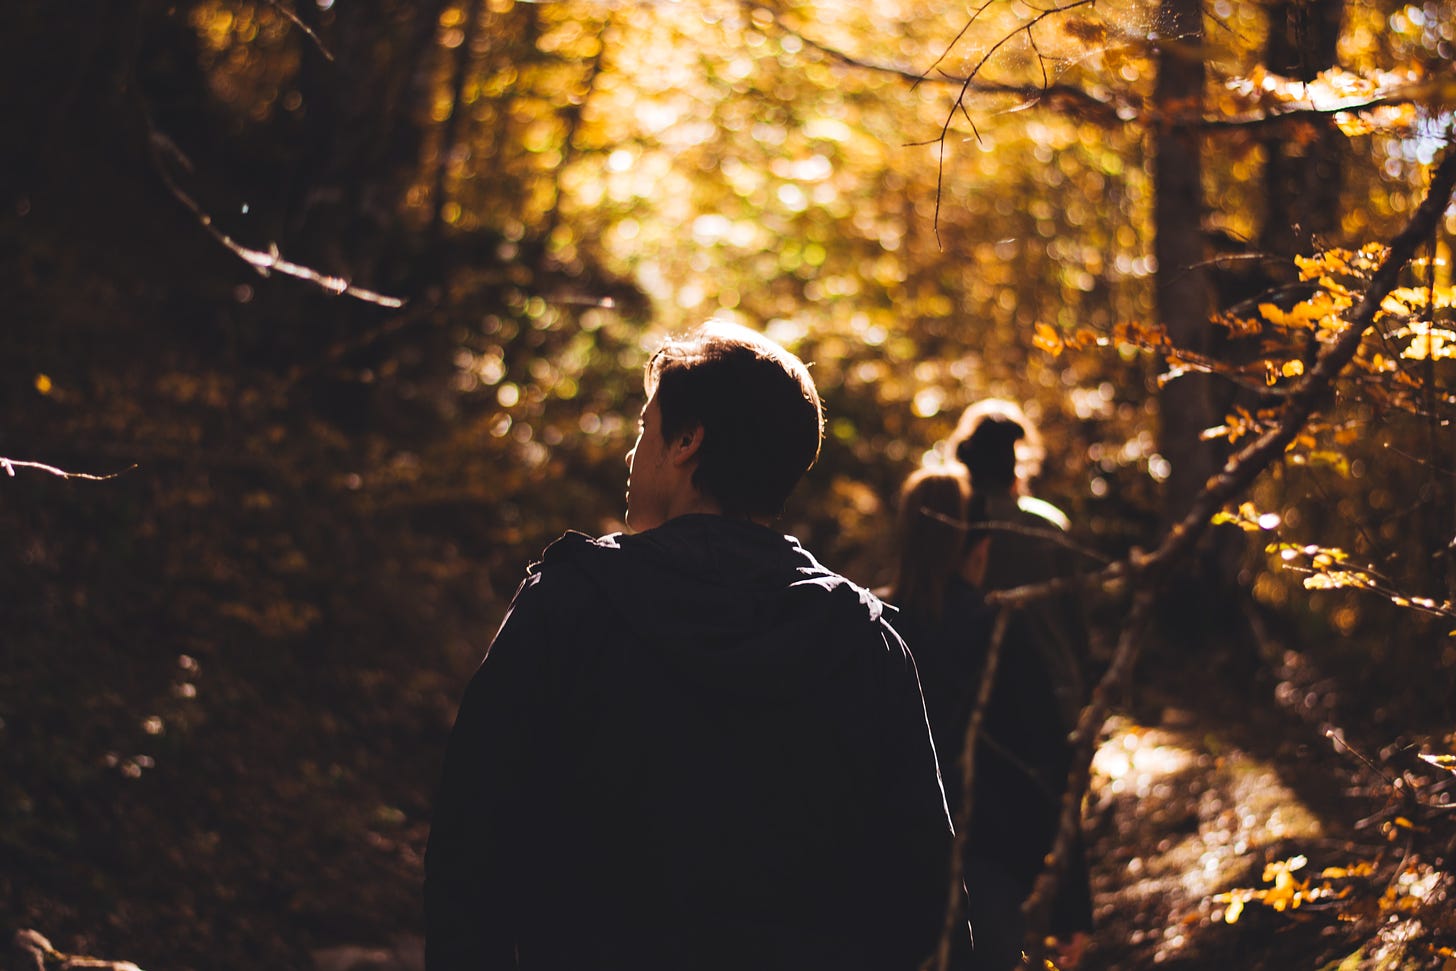 A woodland walk to connect with nature. Photo by Milos Tonchevski on Unsplash